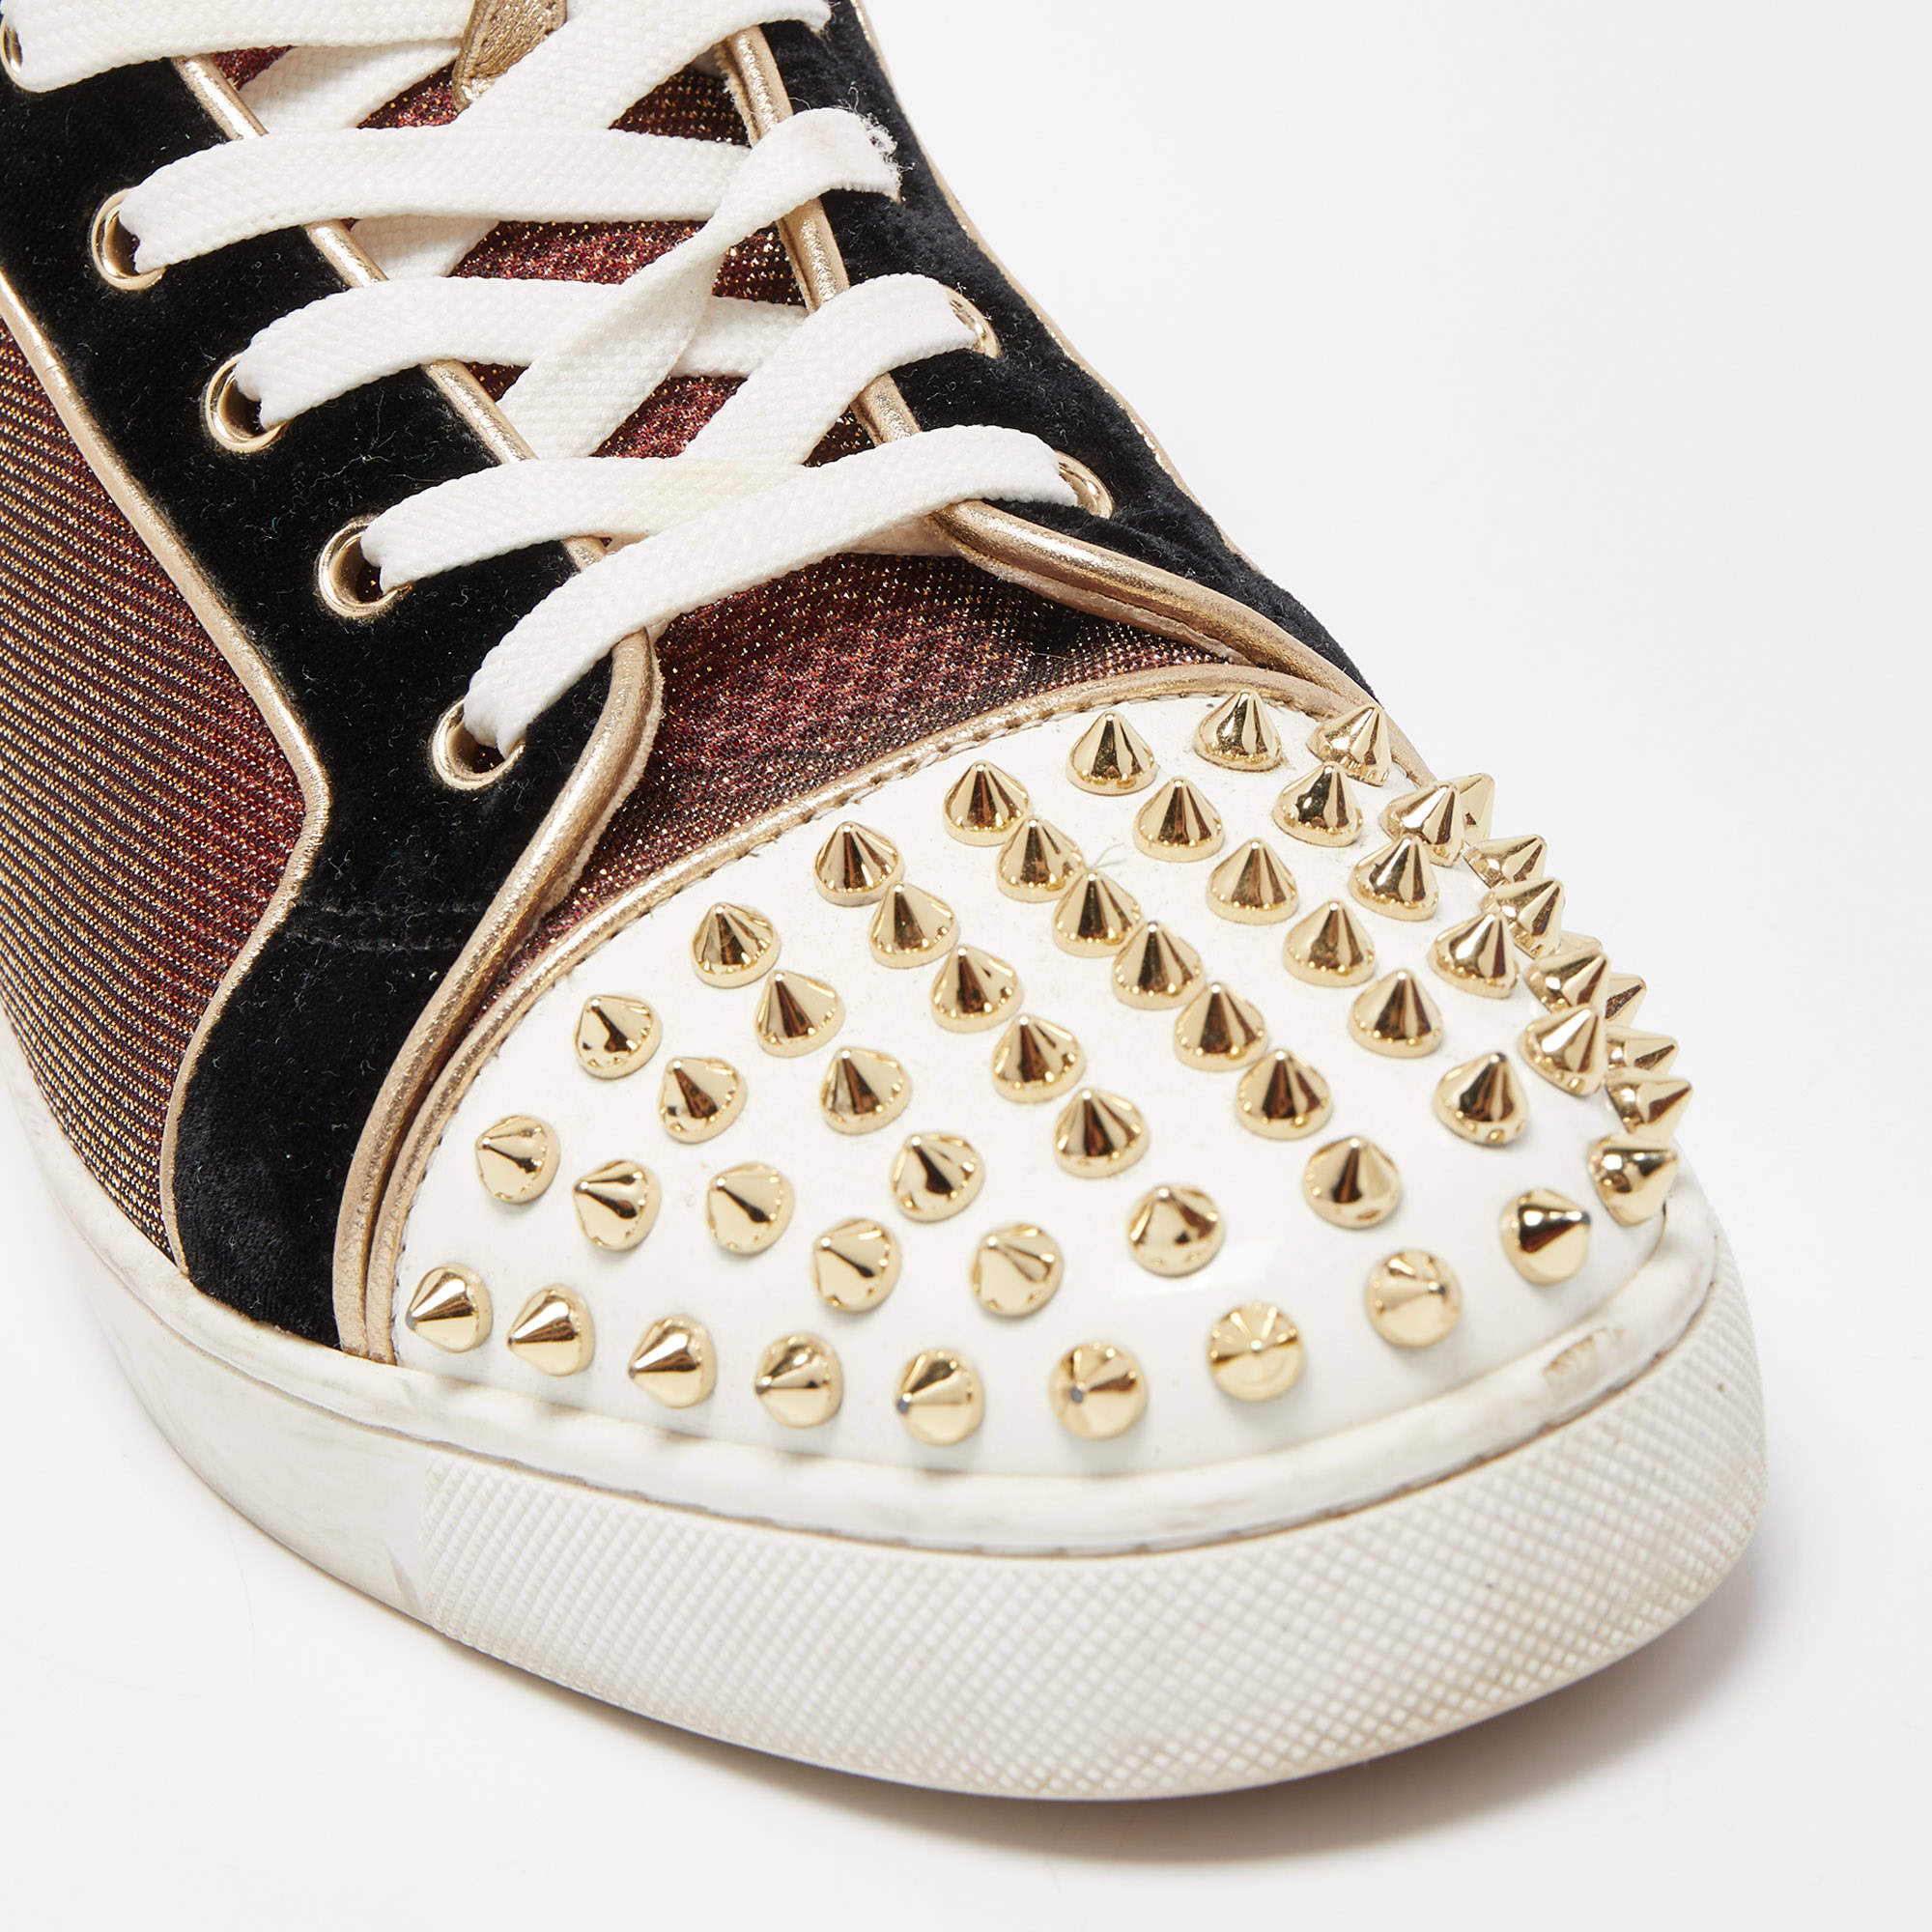 Christian Louboutin Multicolor Woven Leather Louis Spikes Cap Toe High Top  Sneakers Size 41.5 Christian Louboutin